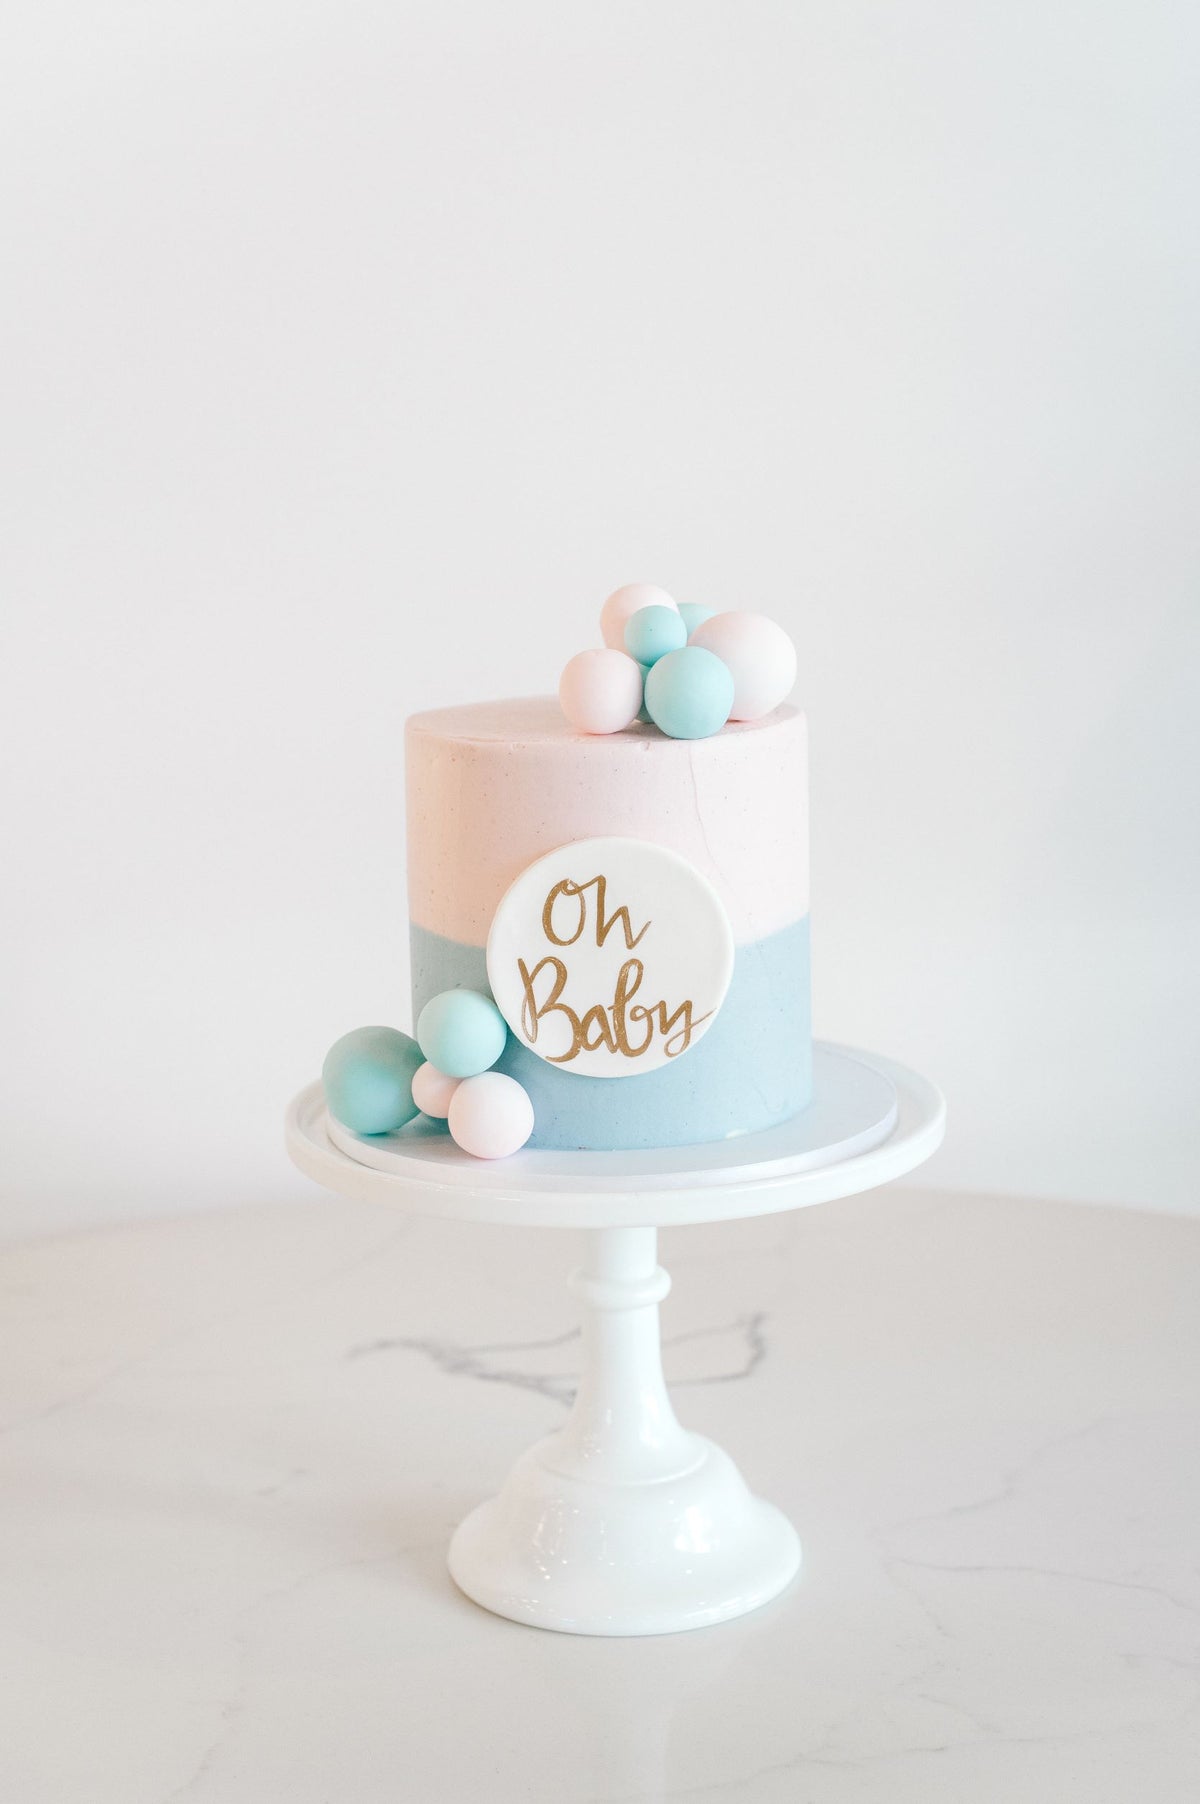 Pin on Cake Creations Perth